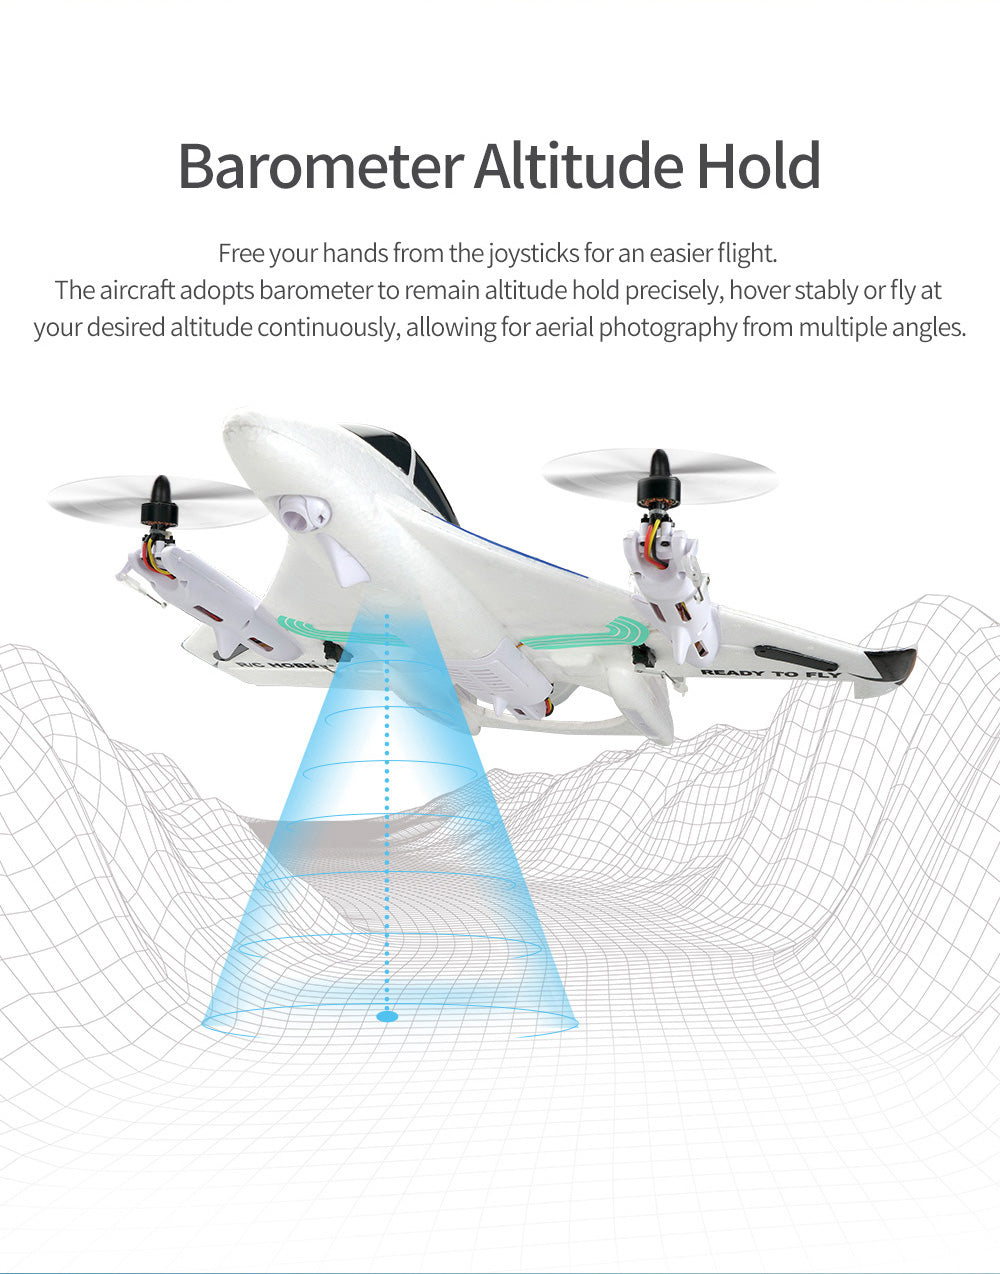 Barometer Altitude Hold,Free your hands from the joysticks for an easier fight.The aircraft adopts barometer to remain altitude hold precisely£¬ hover stably or fly at your desired altitude continuously£¬ allowing for aerial photography from multiple angles.